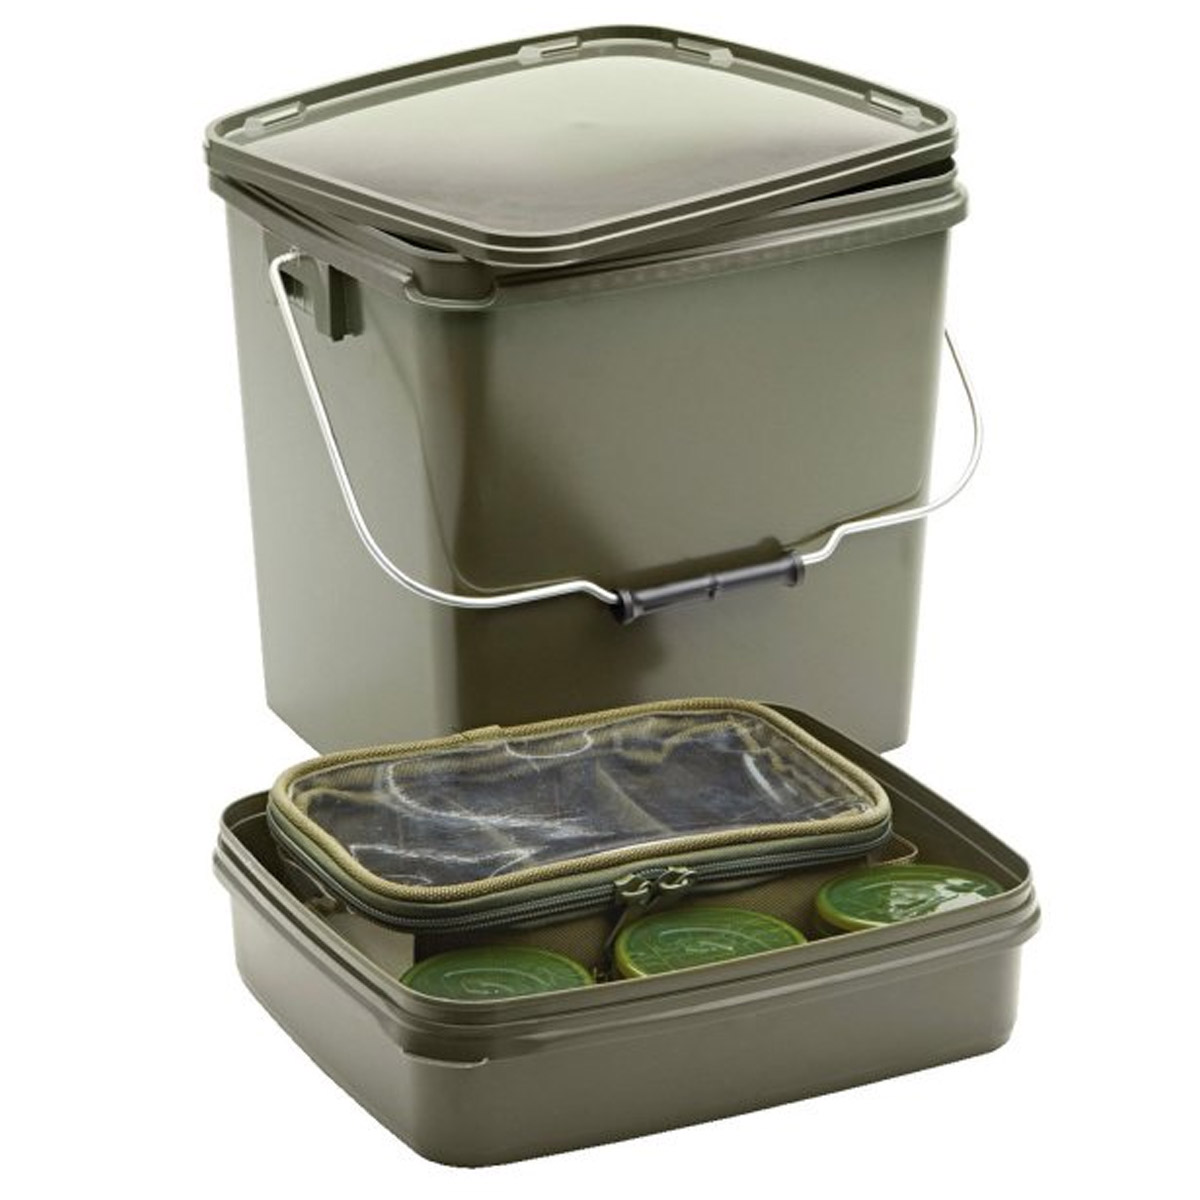 Trakker 13 Ltr Olive Square Container Incl. Tray